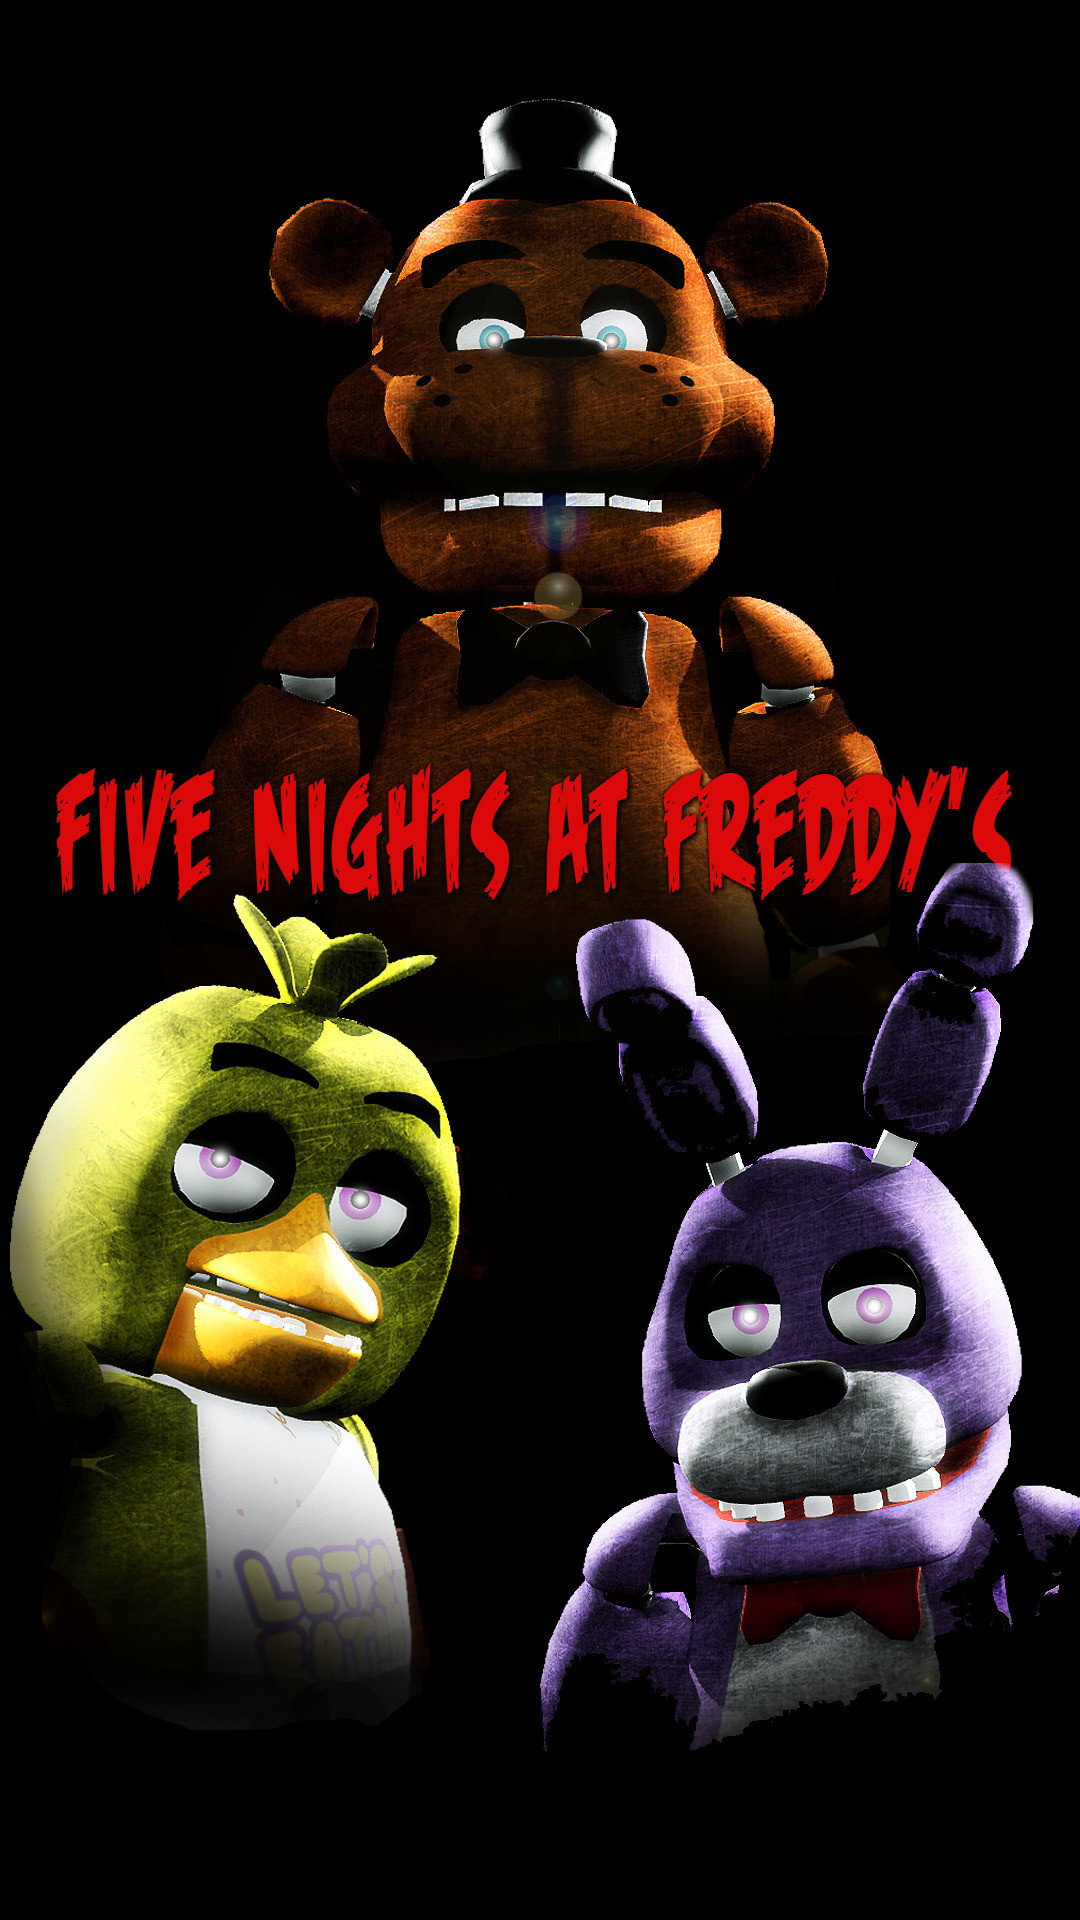 Five Nights at Freddys Samsung Galaxy Note 3 wallpaper Resolution 1080×1920 by FioreRose